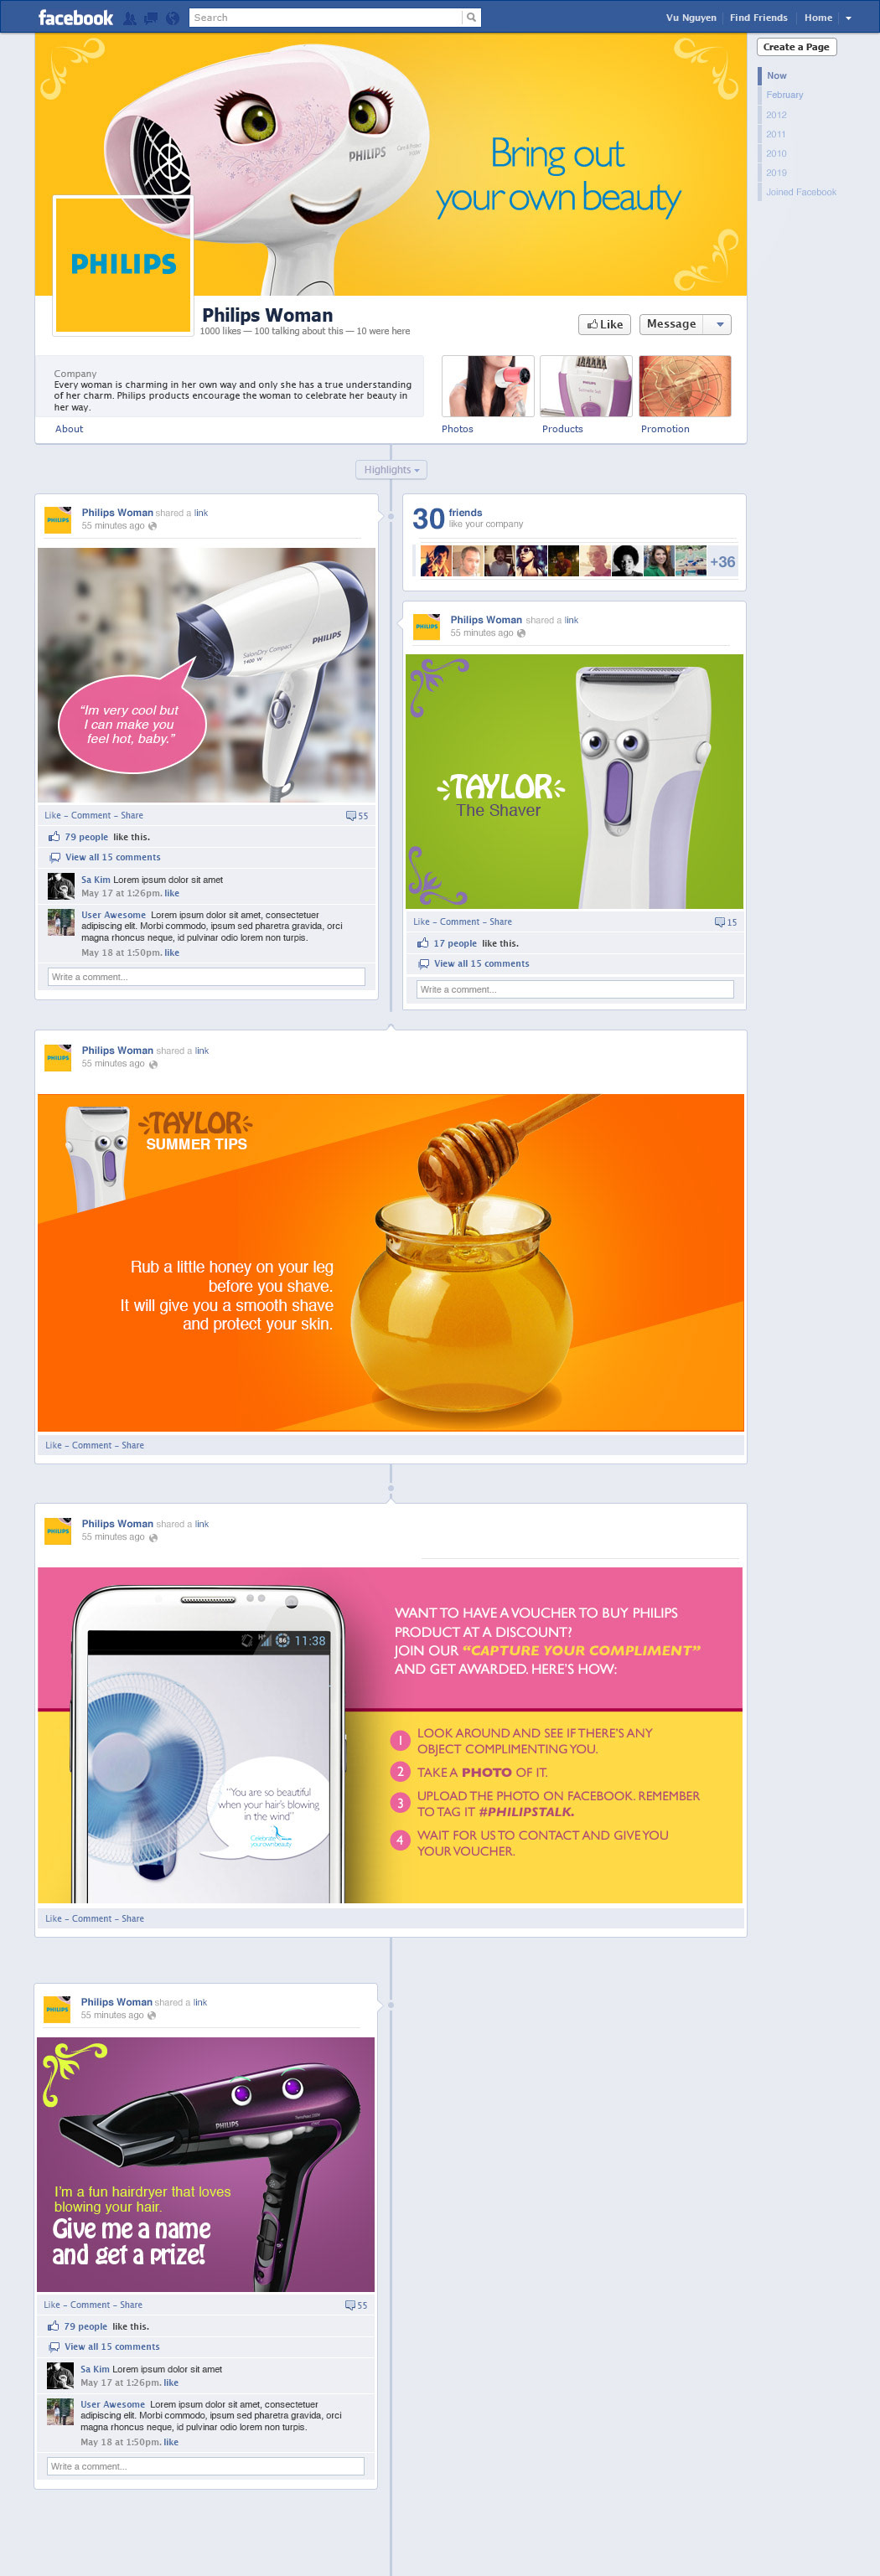 Philips beauty care facebook content 